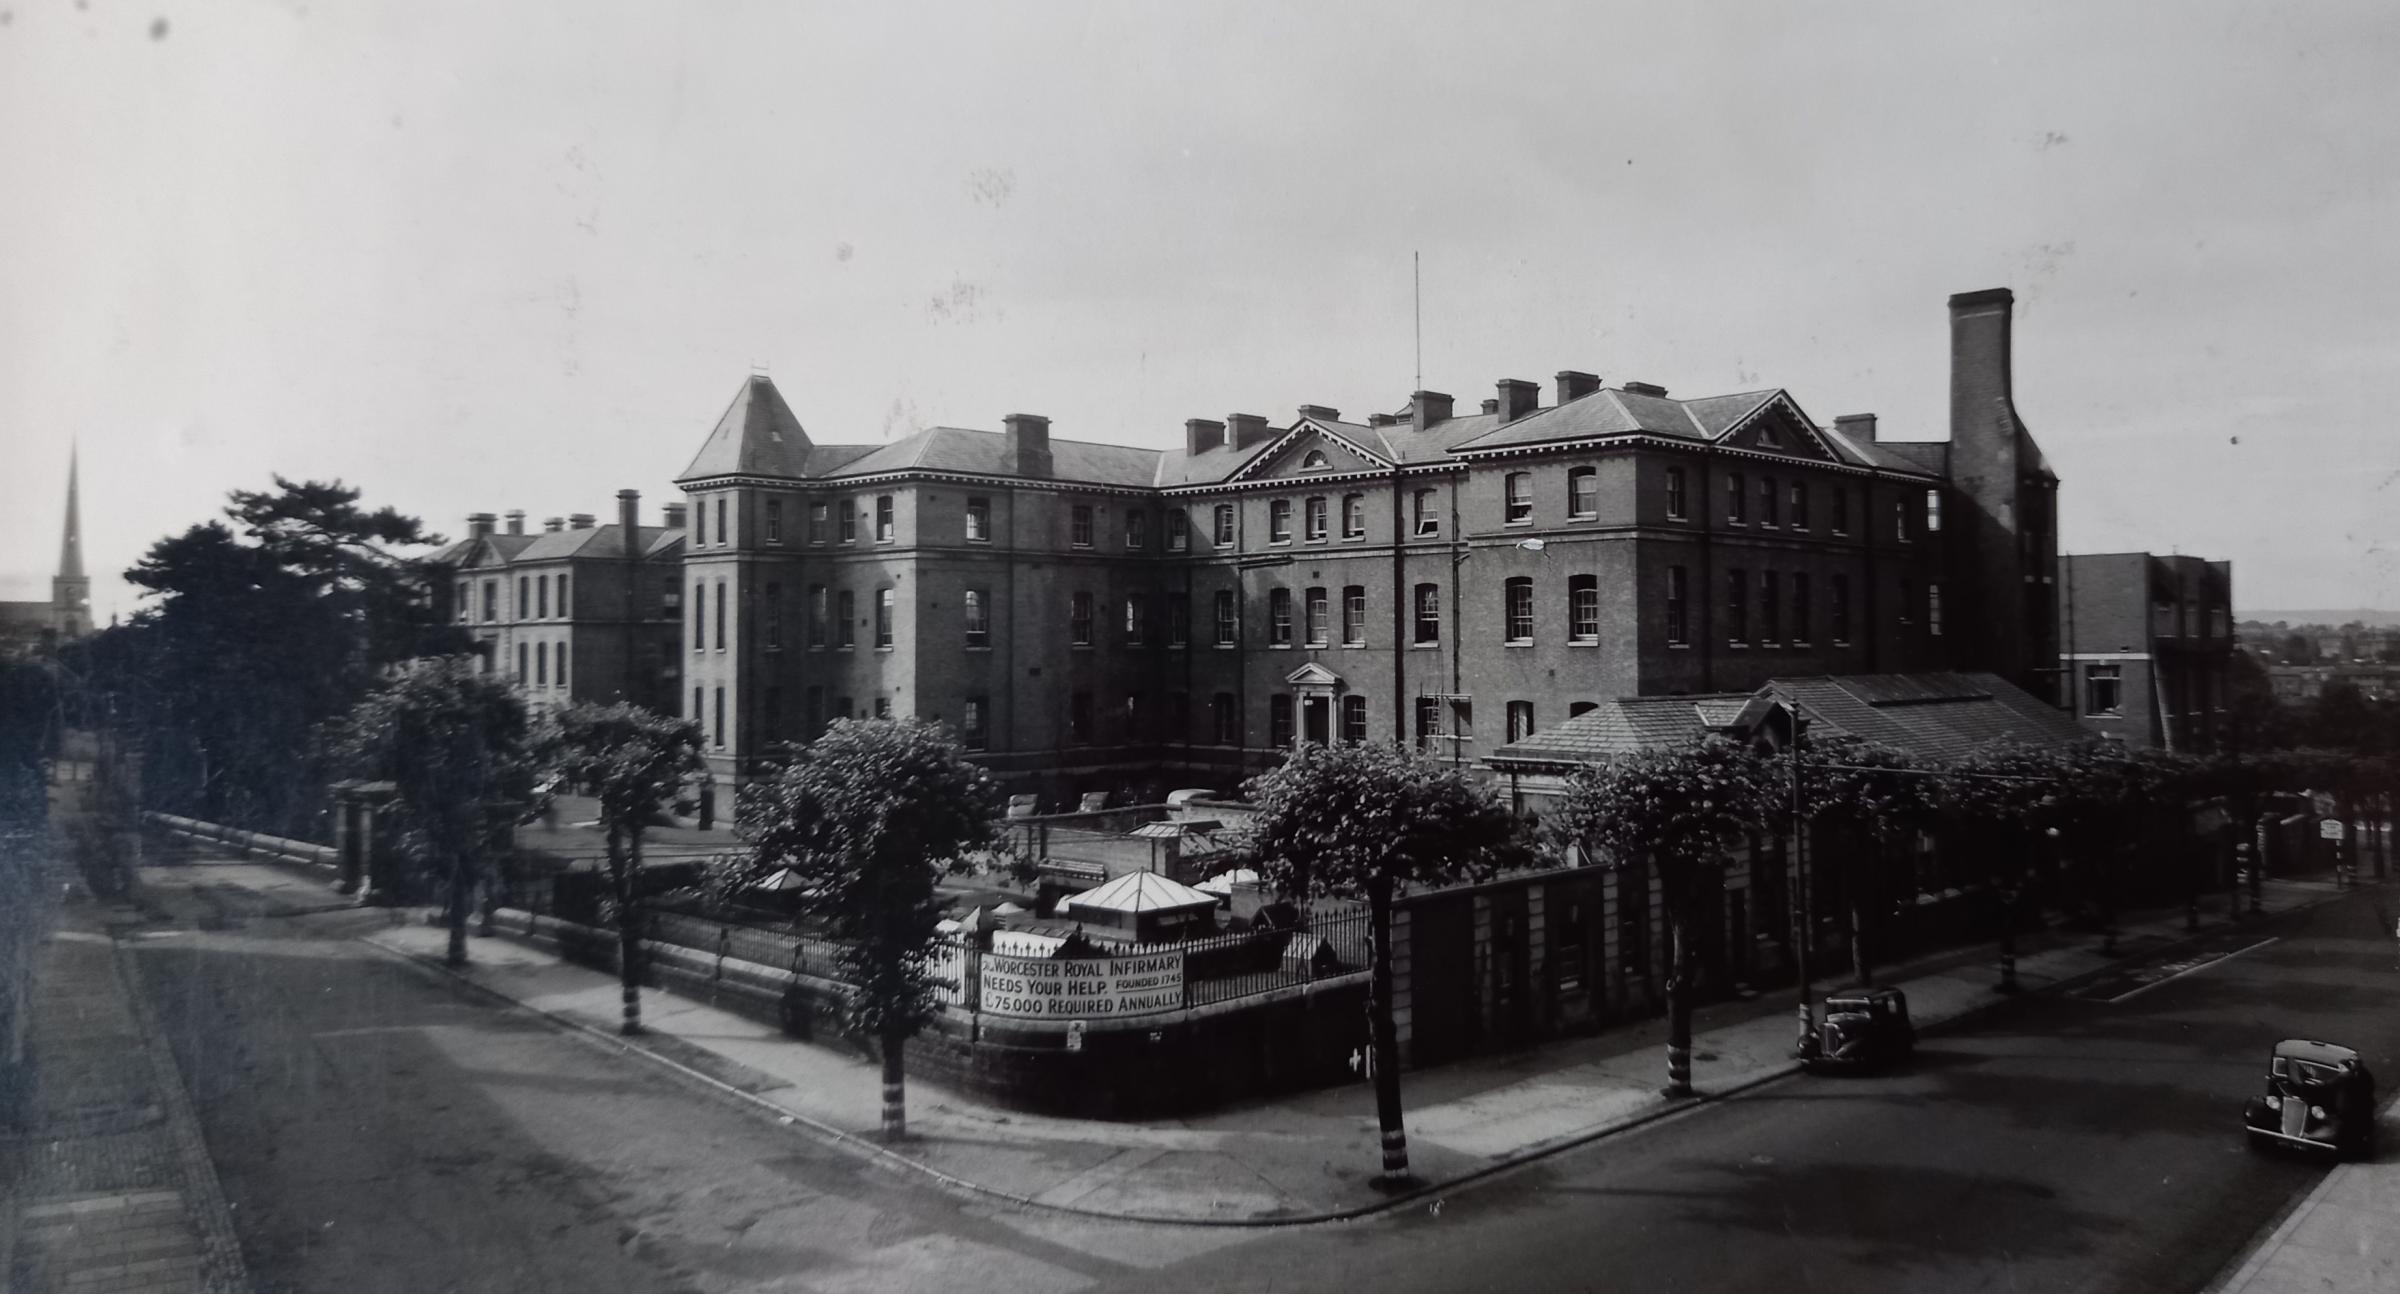 Worcester Royal Infirmary as many older city folk will remember it. Image undated but possibly from the 1950s